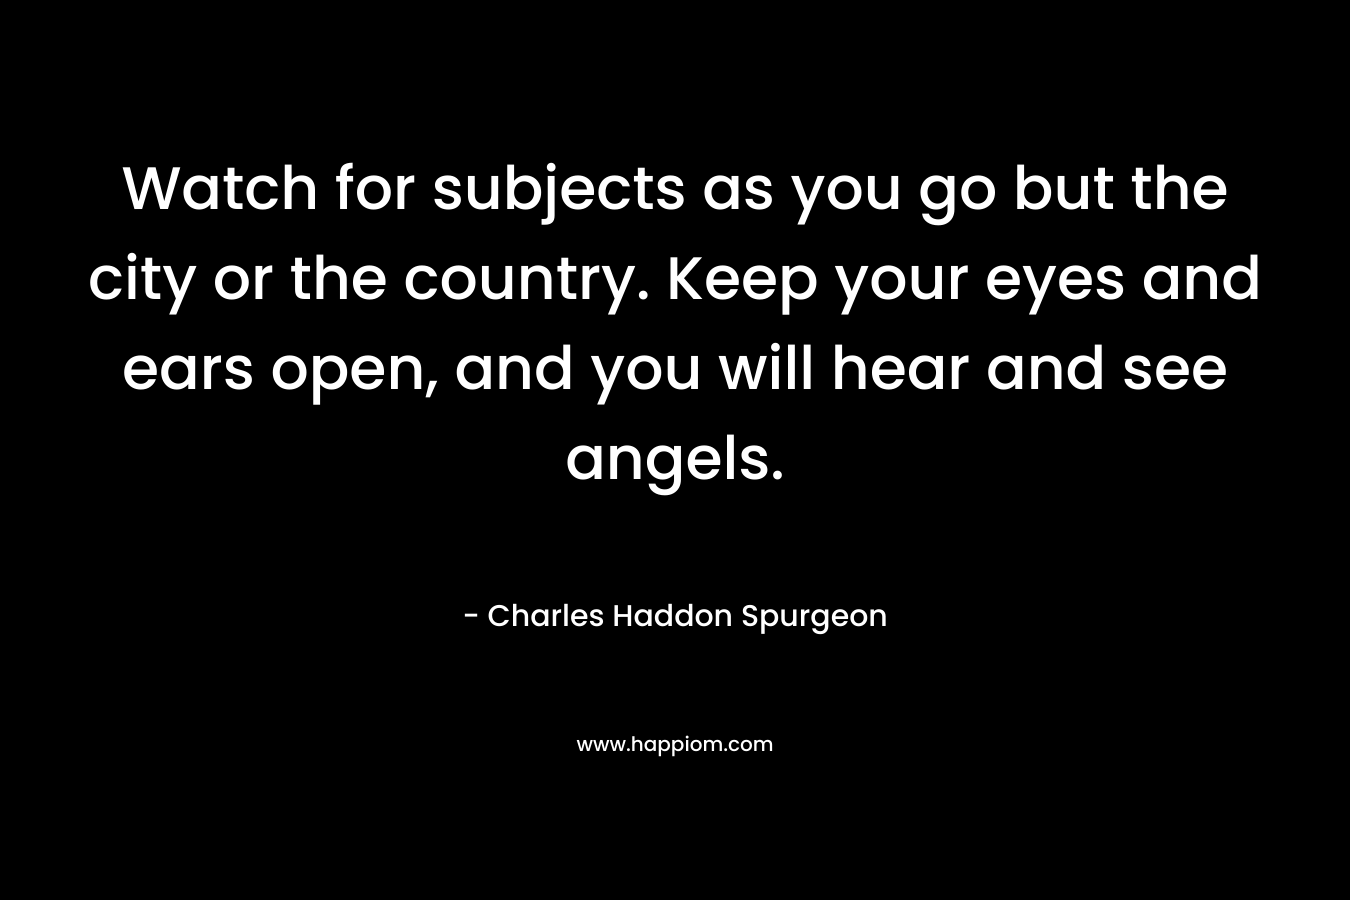 Watch for subjects as you go but the city or the country. Keep your eyes and ears open, and you will hear and see angels. – Charles Haddon Spurgeon